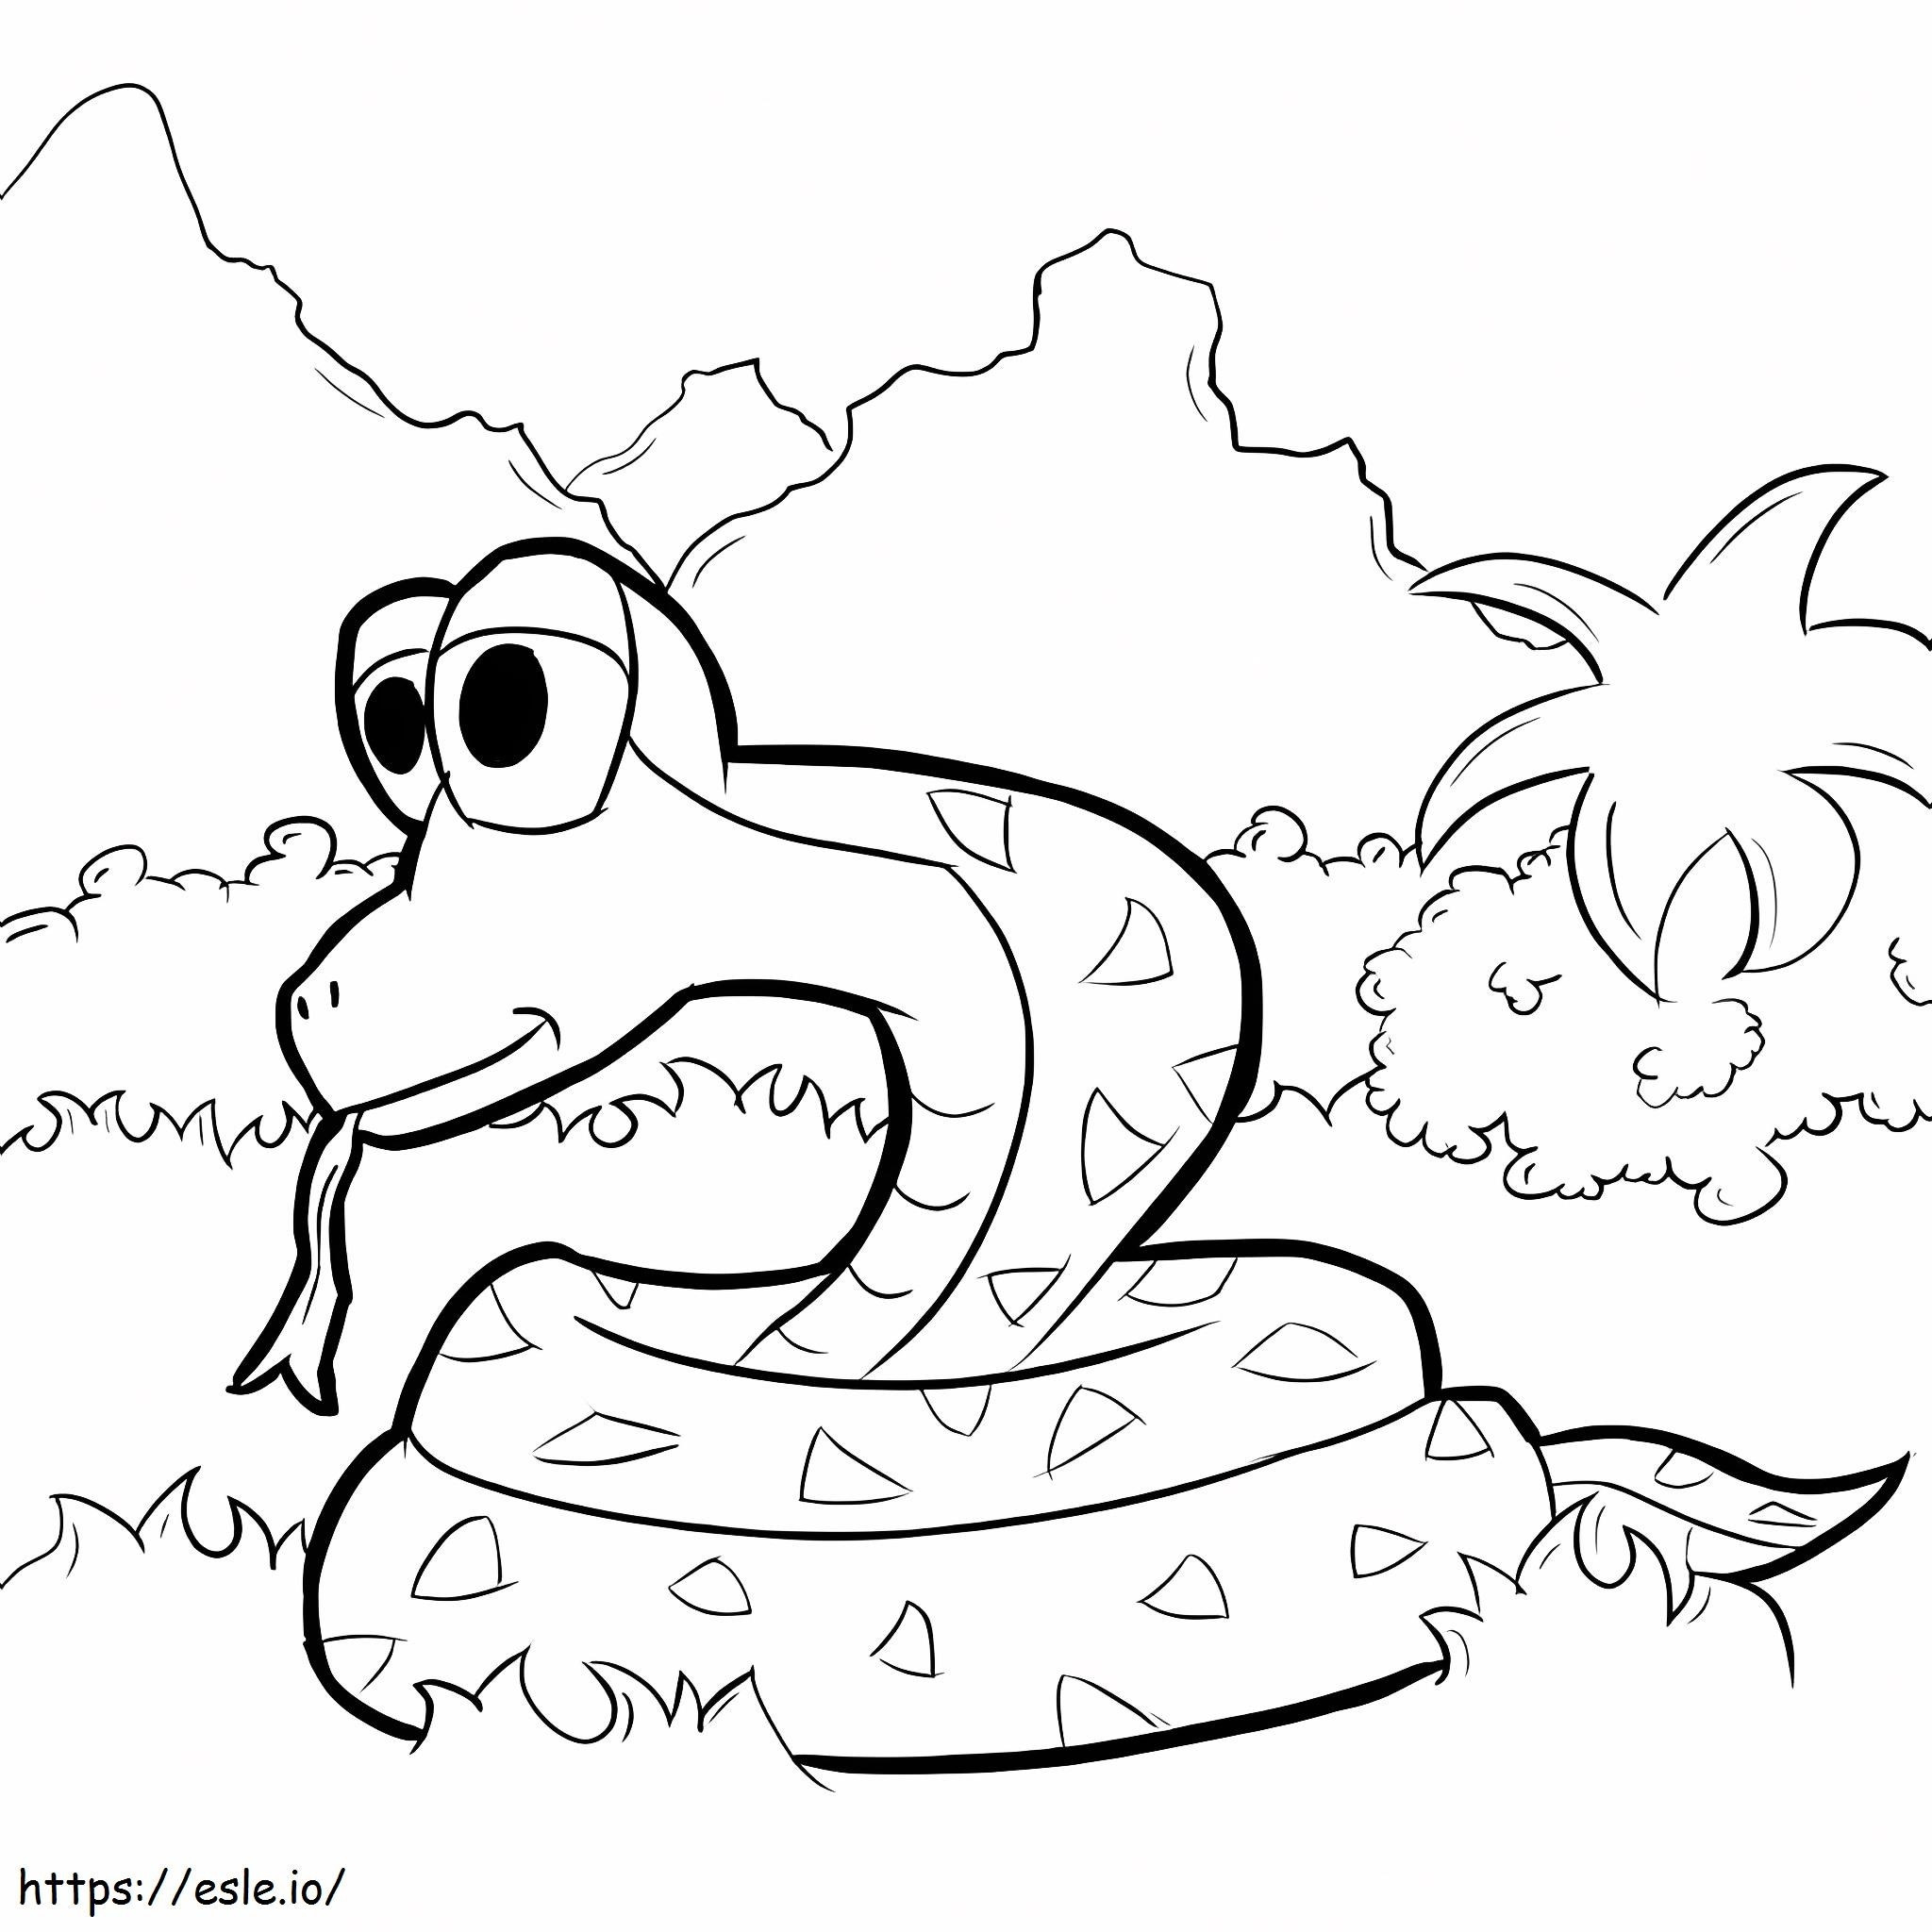 Snake In The Jungle coloring page